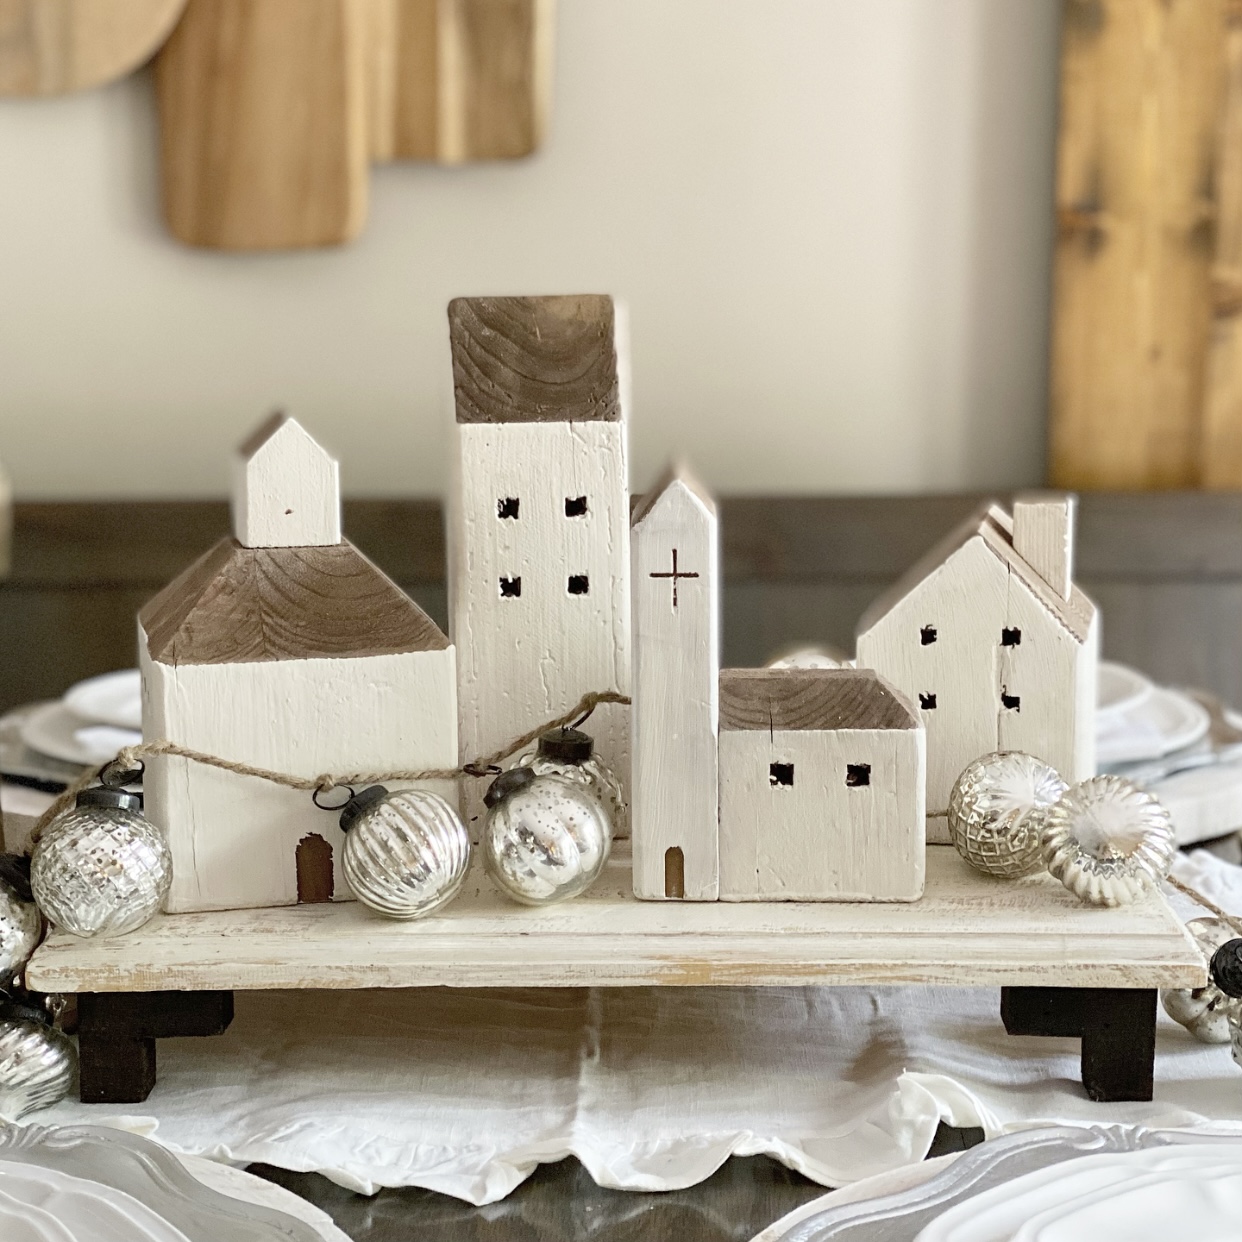 Centerpiece with reclaimed wood houses on a riser. Around the houses is garland made of small glass mercury ornaments.